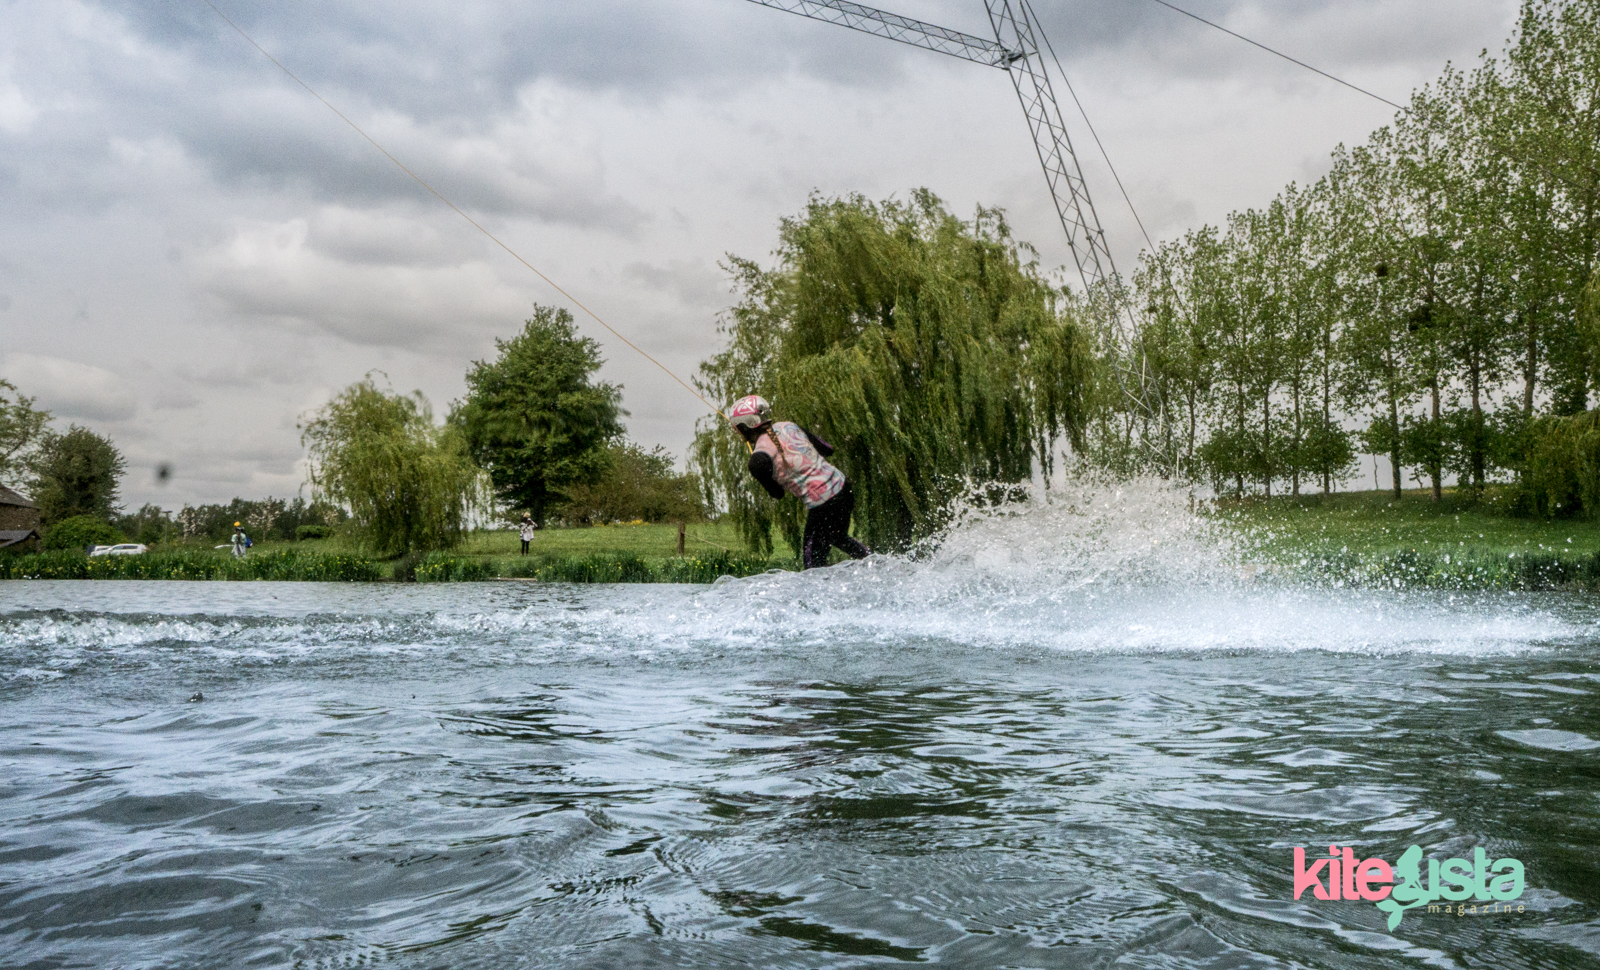 Taking Corners at the cable Park - KiteSista